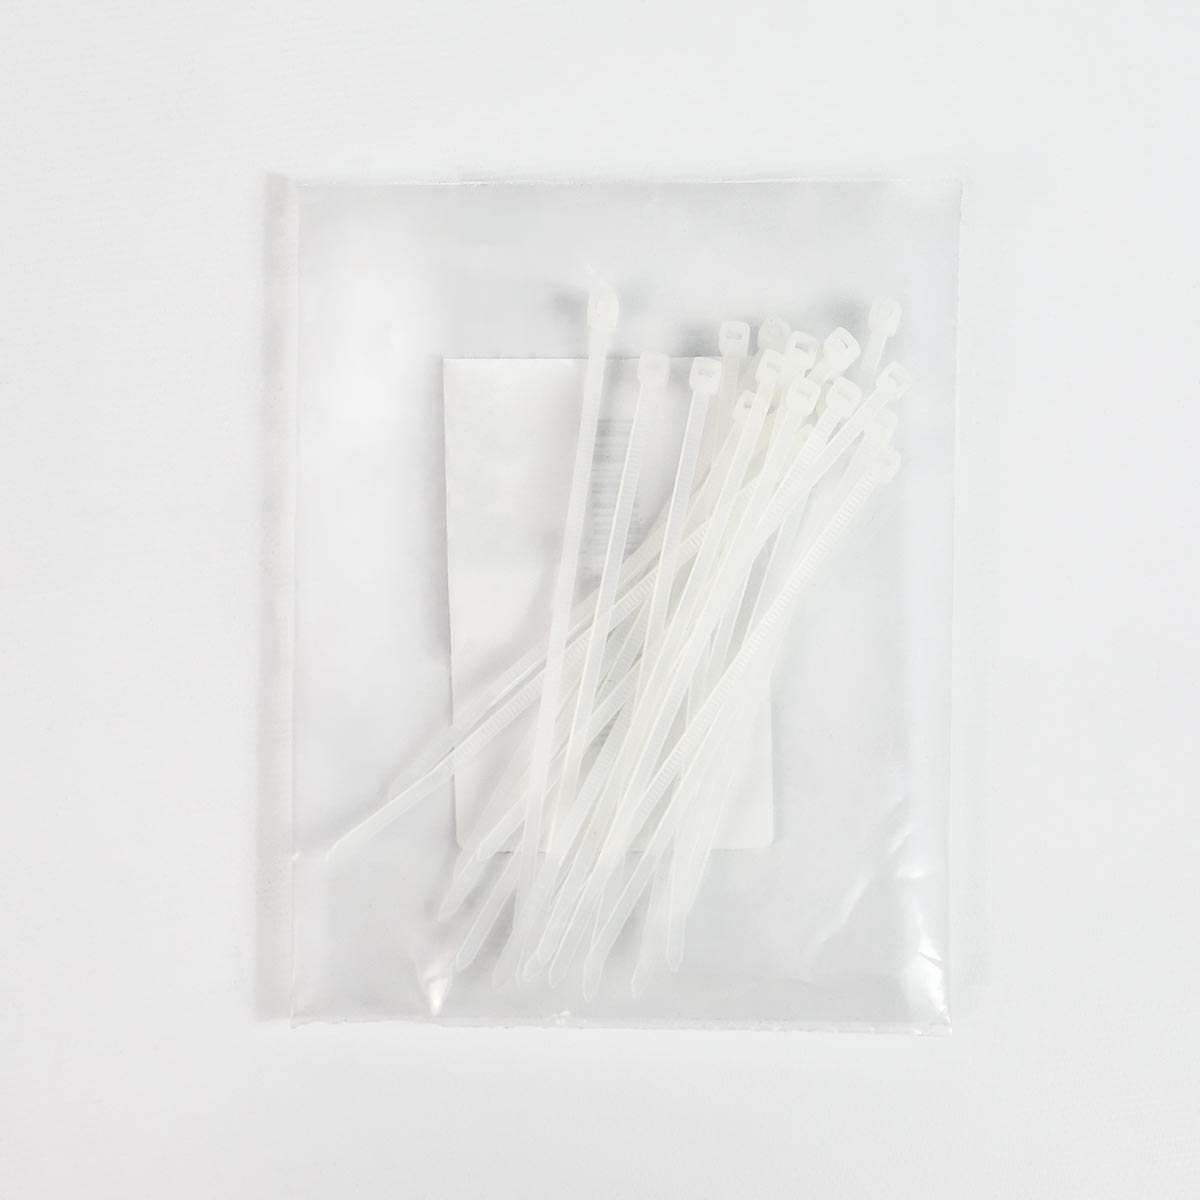 100mm x 2.5mm Cable Ties, 20pcs image 6